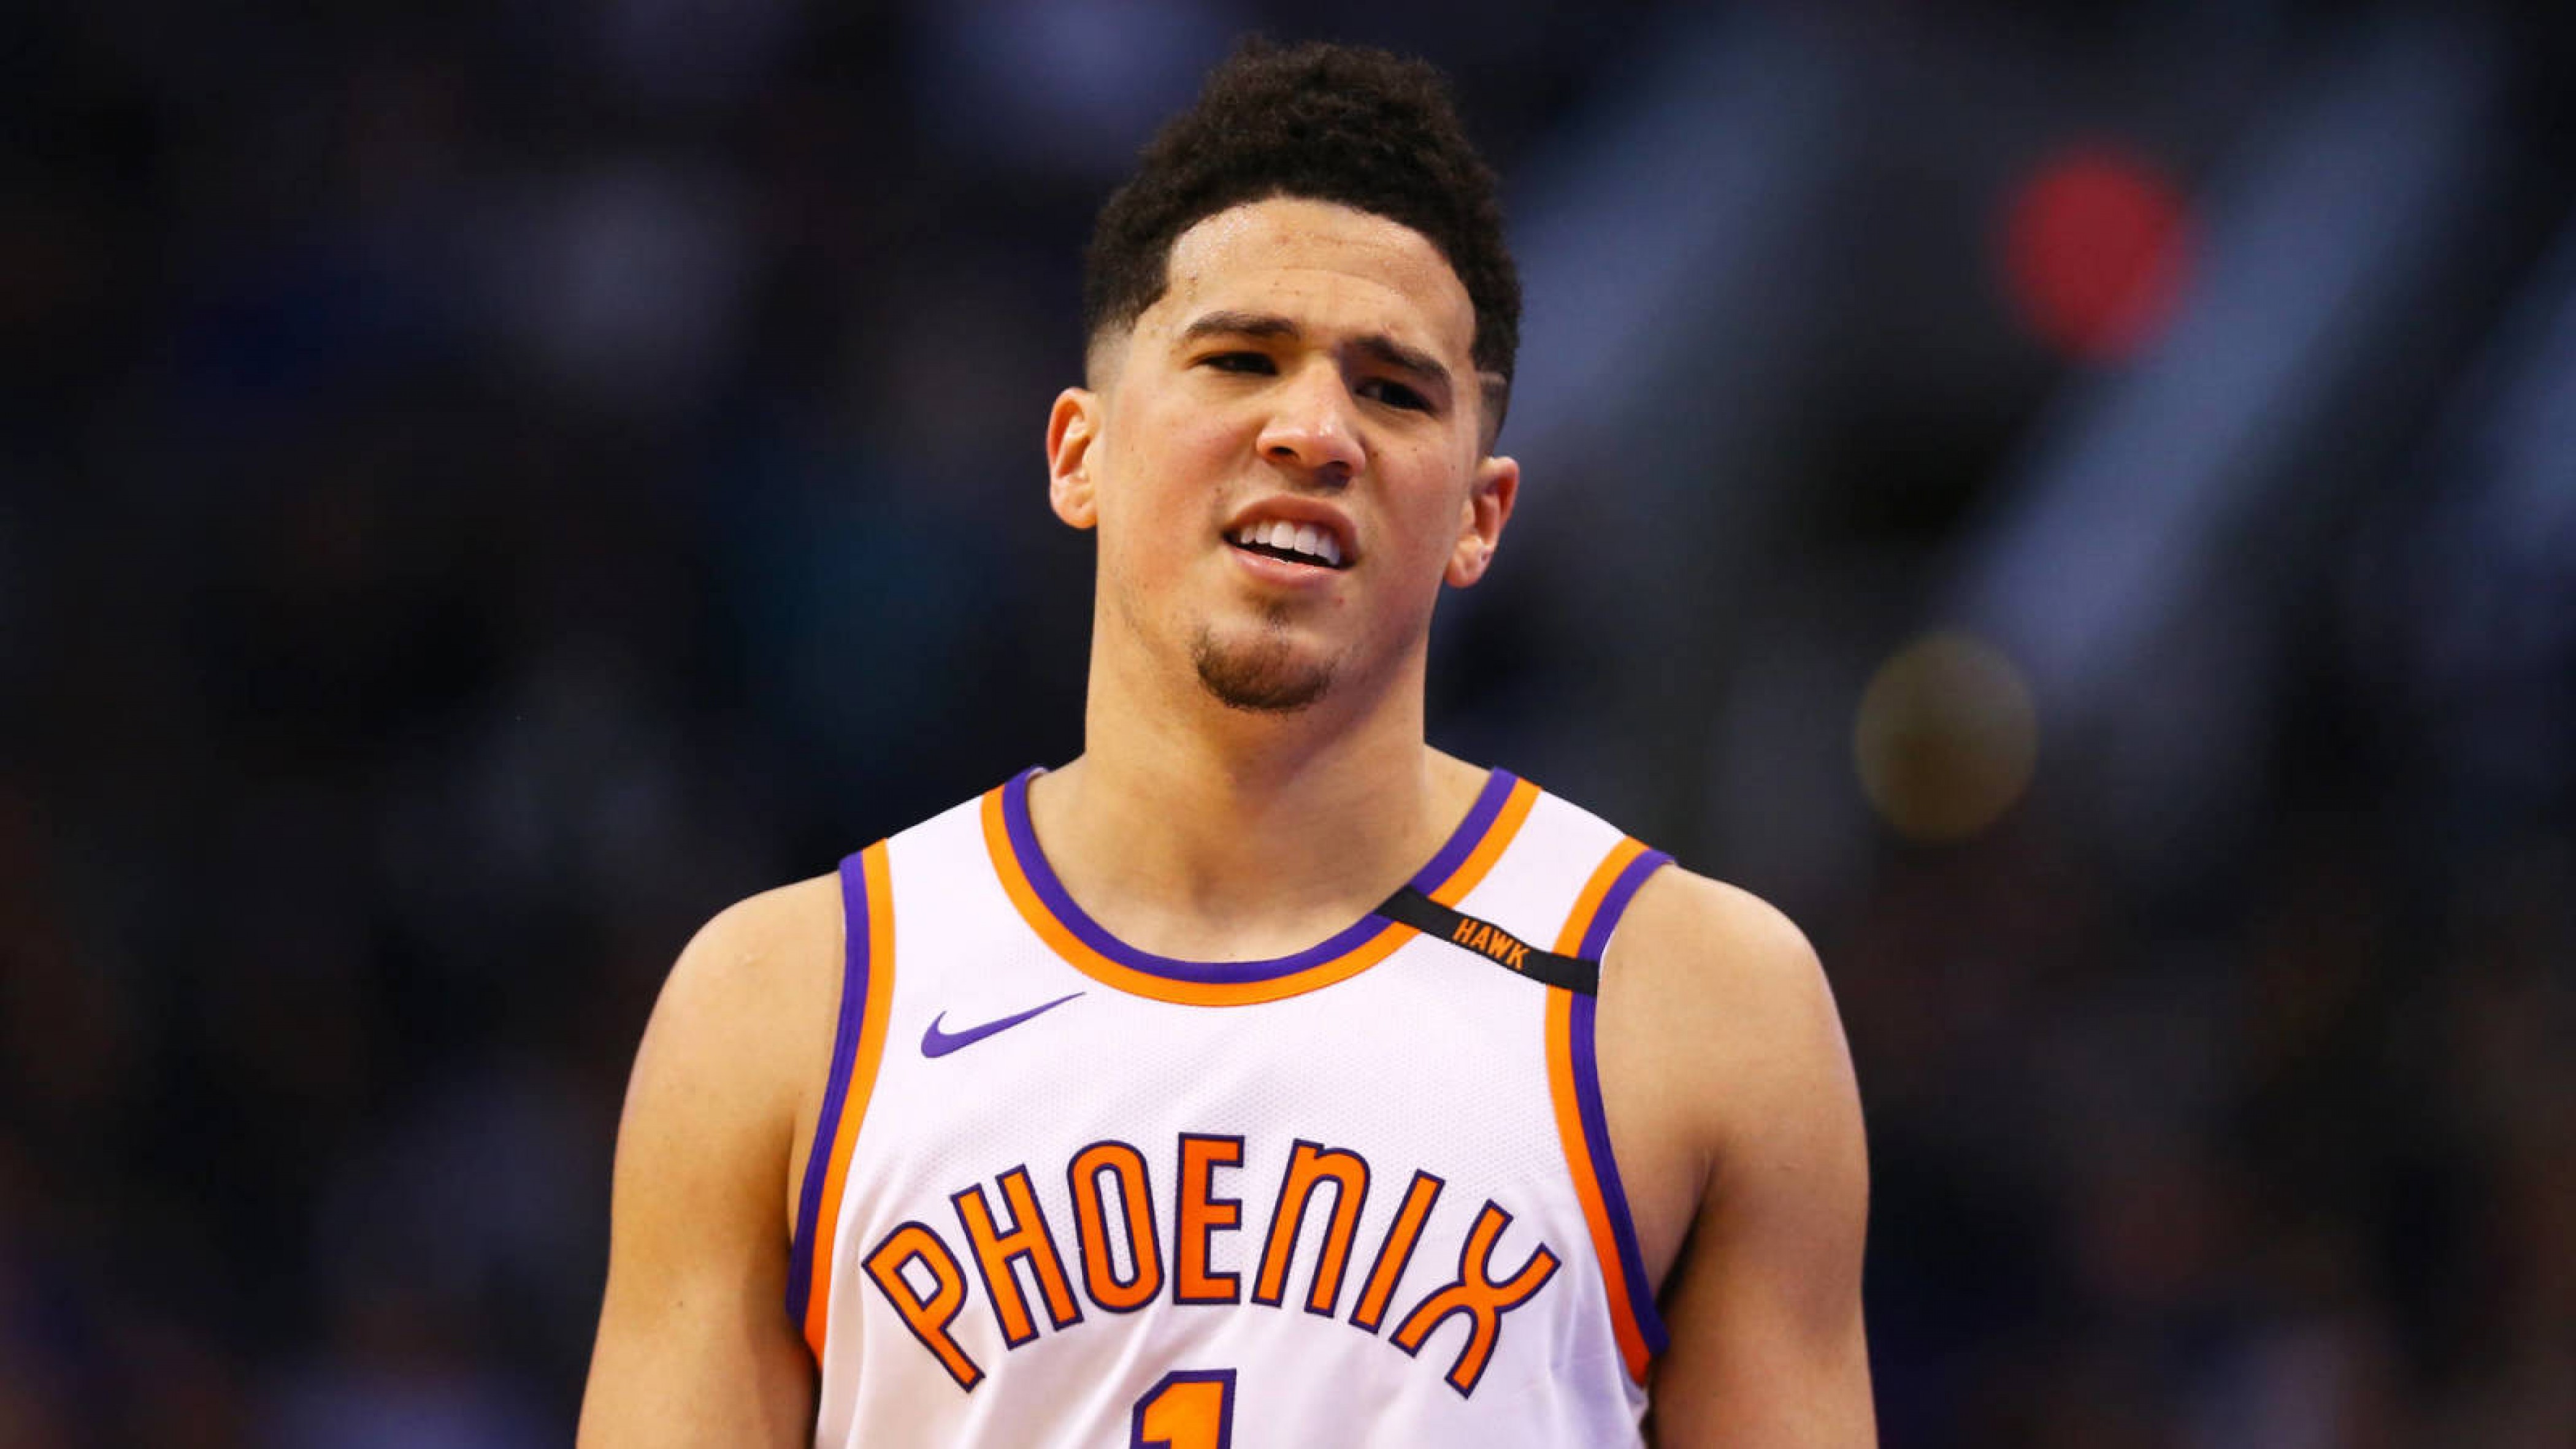 Phoenix Suns' guard Devin Booker likely out until training camp